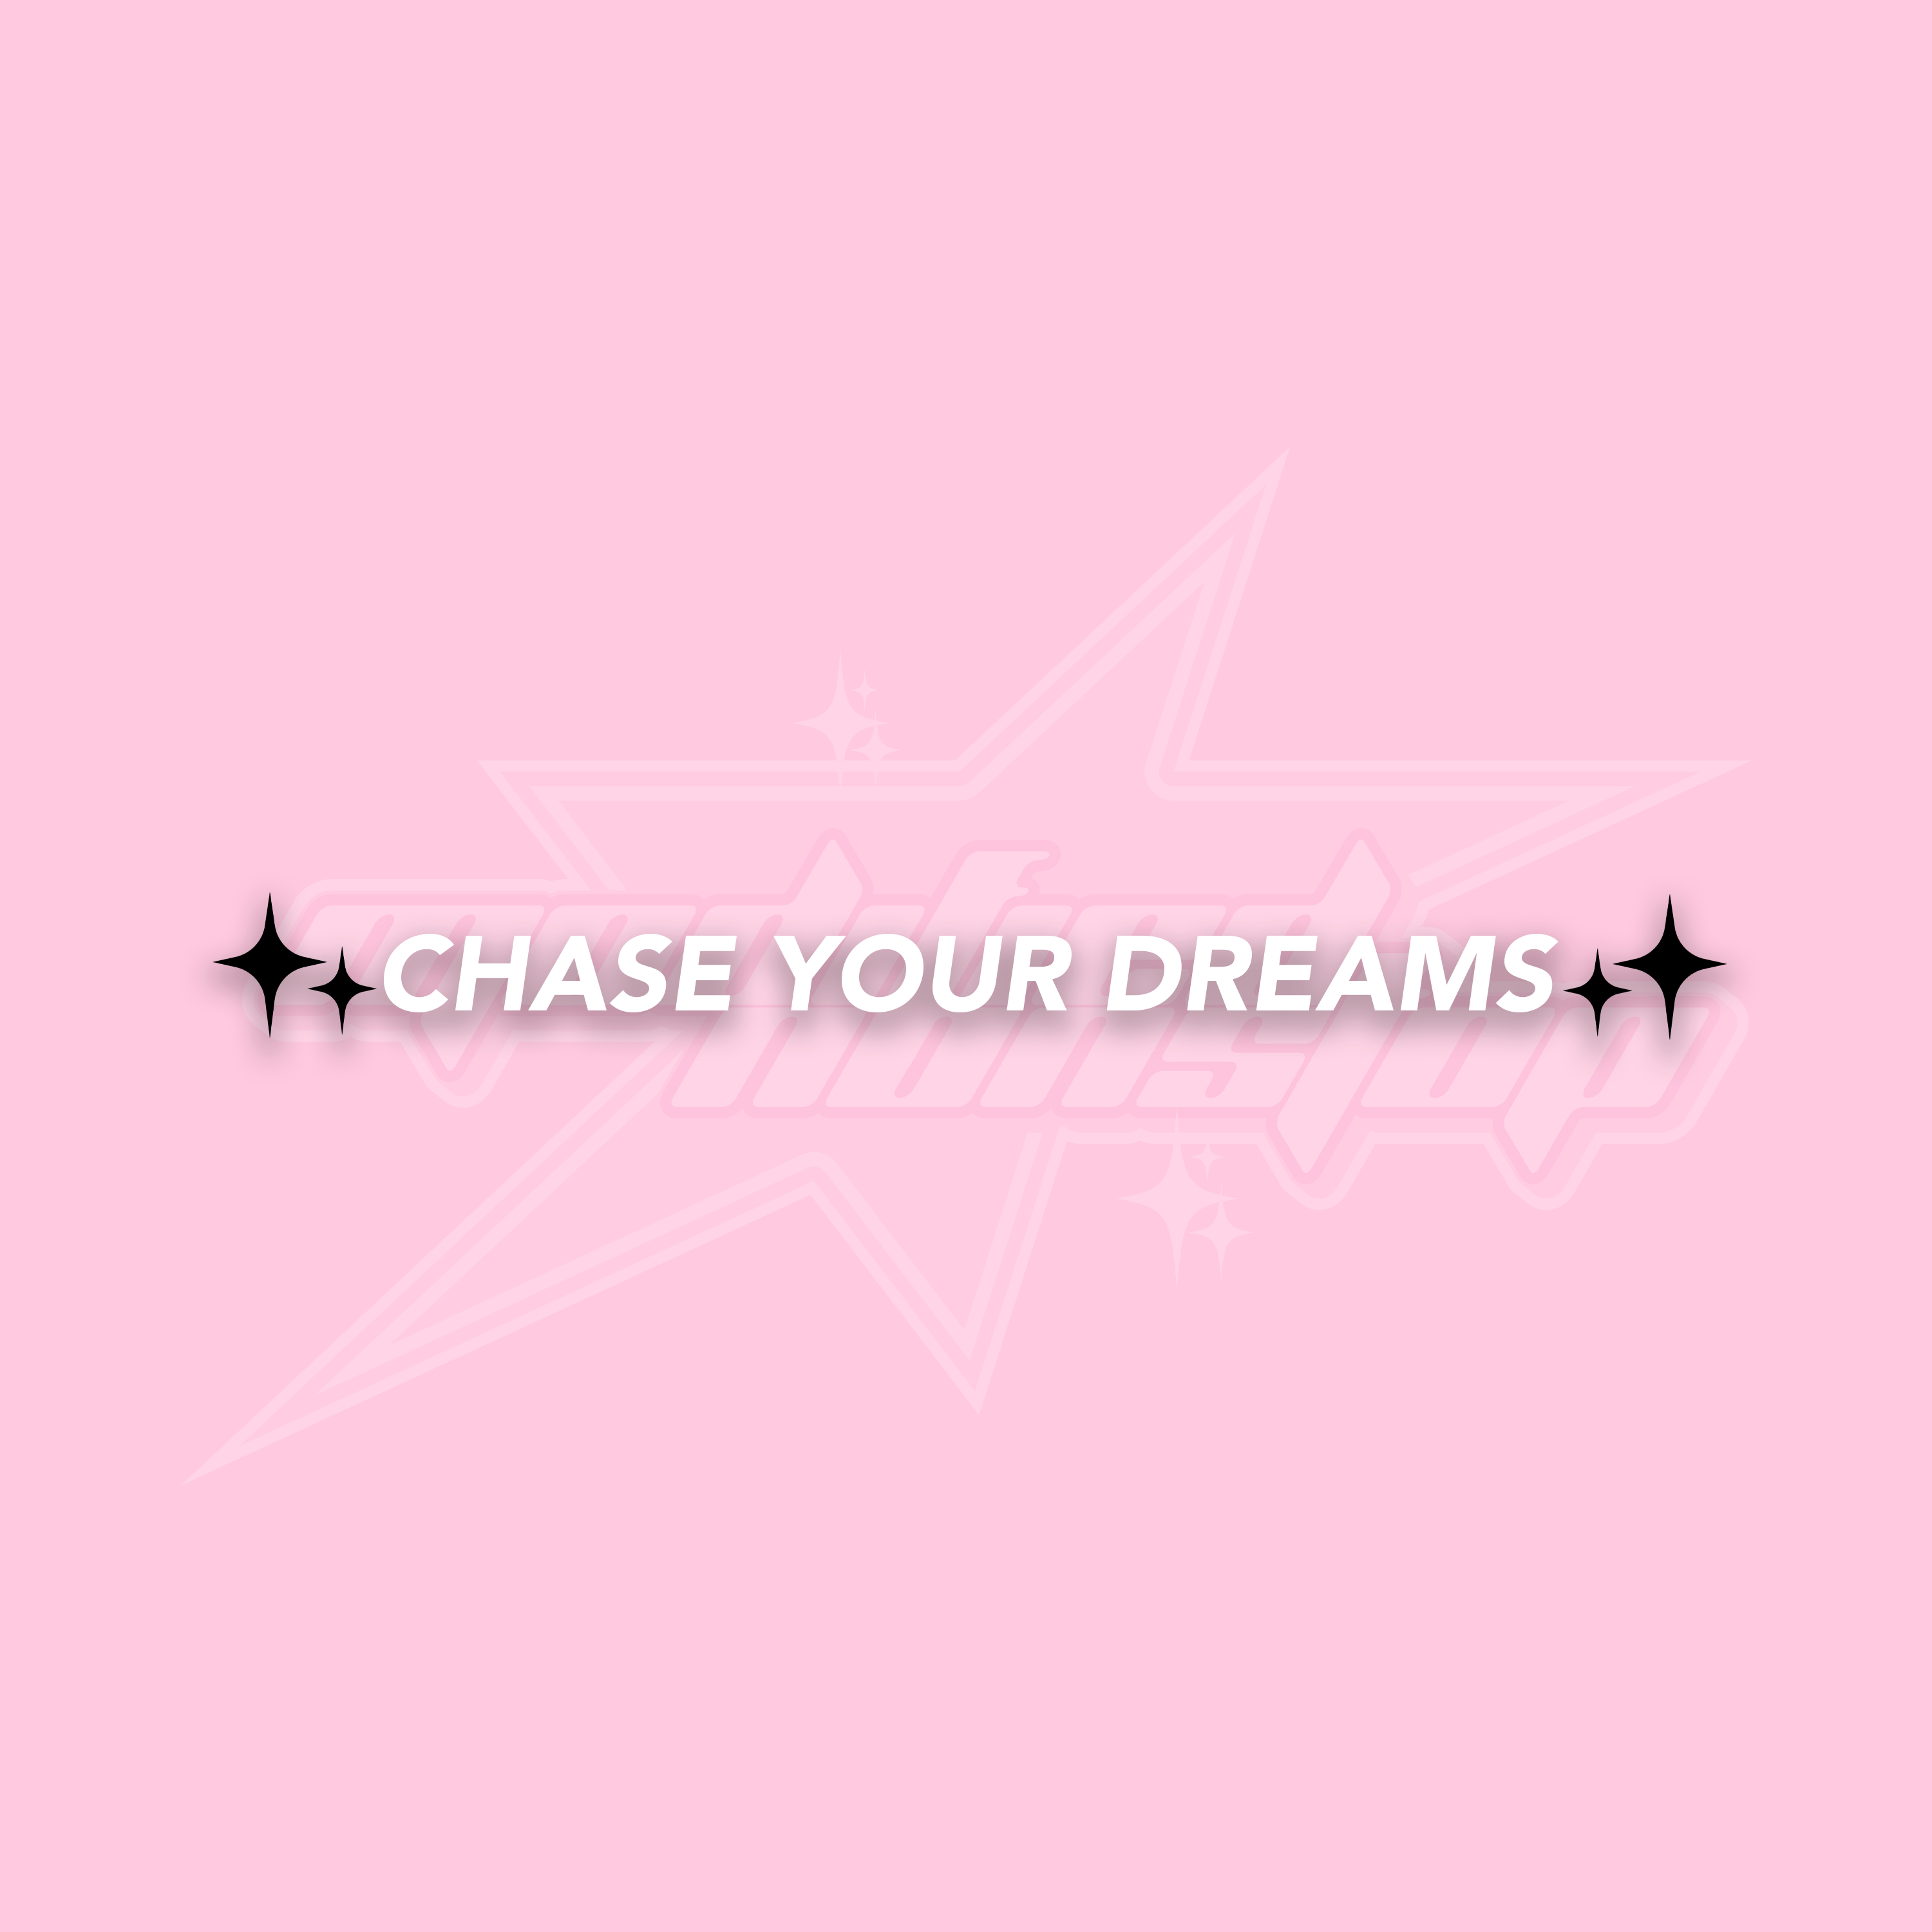 Chase Your Dreams (side view mirror)